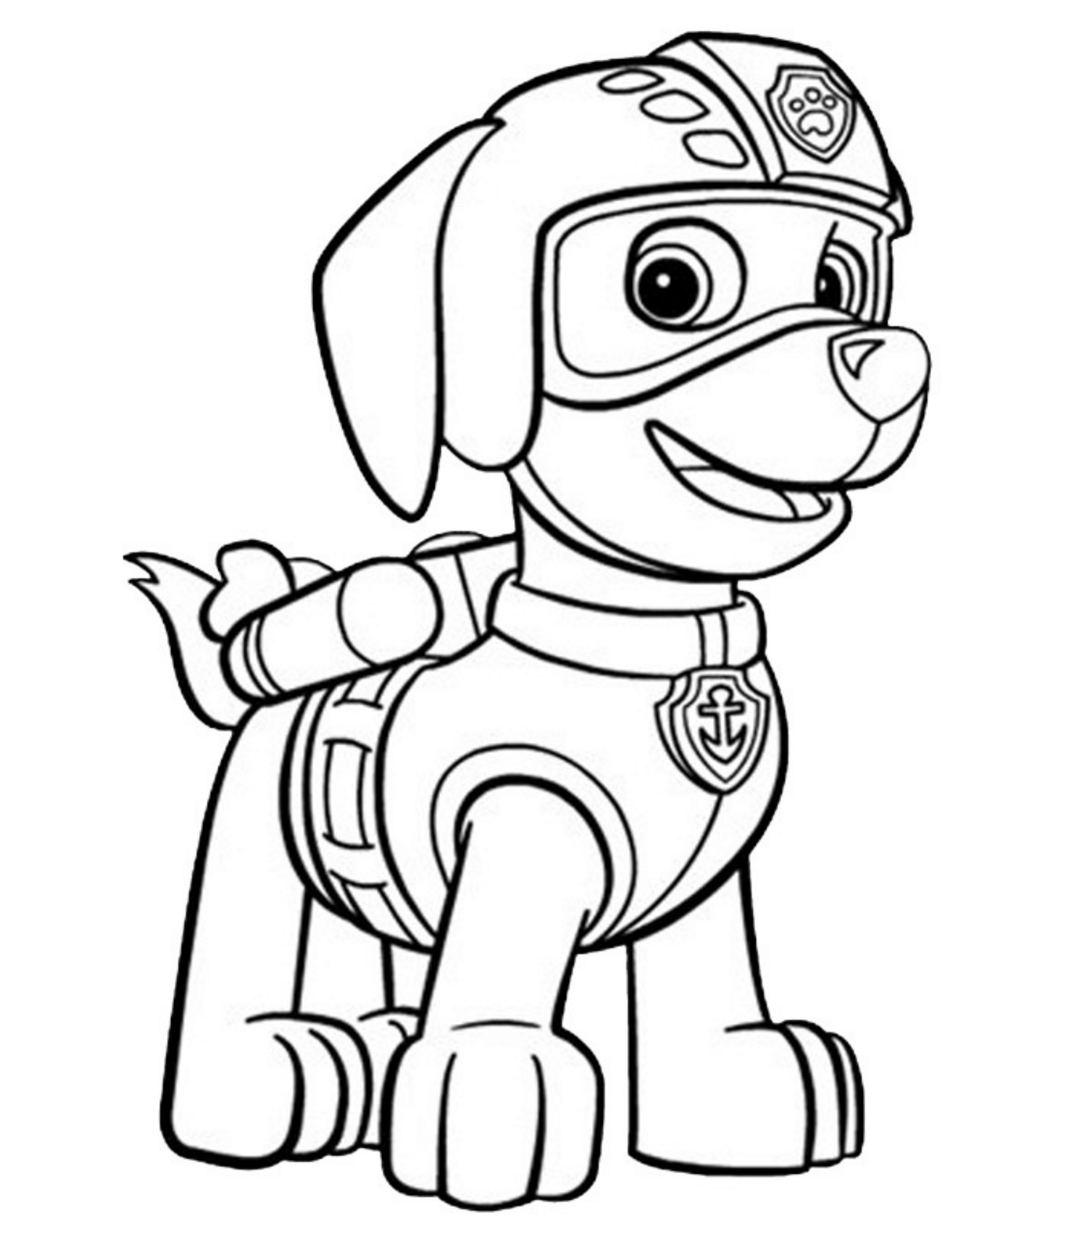 PAW Patrol Coloring Book Pages